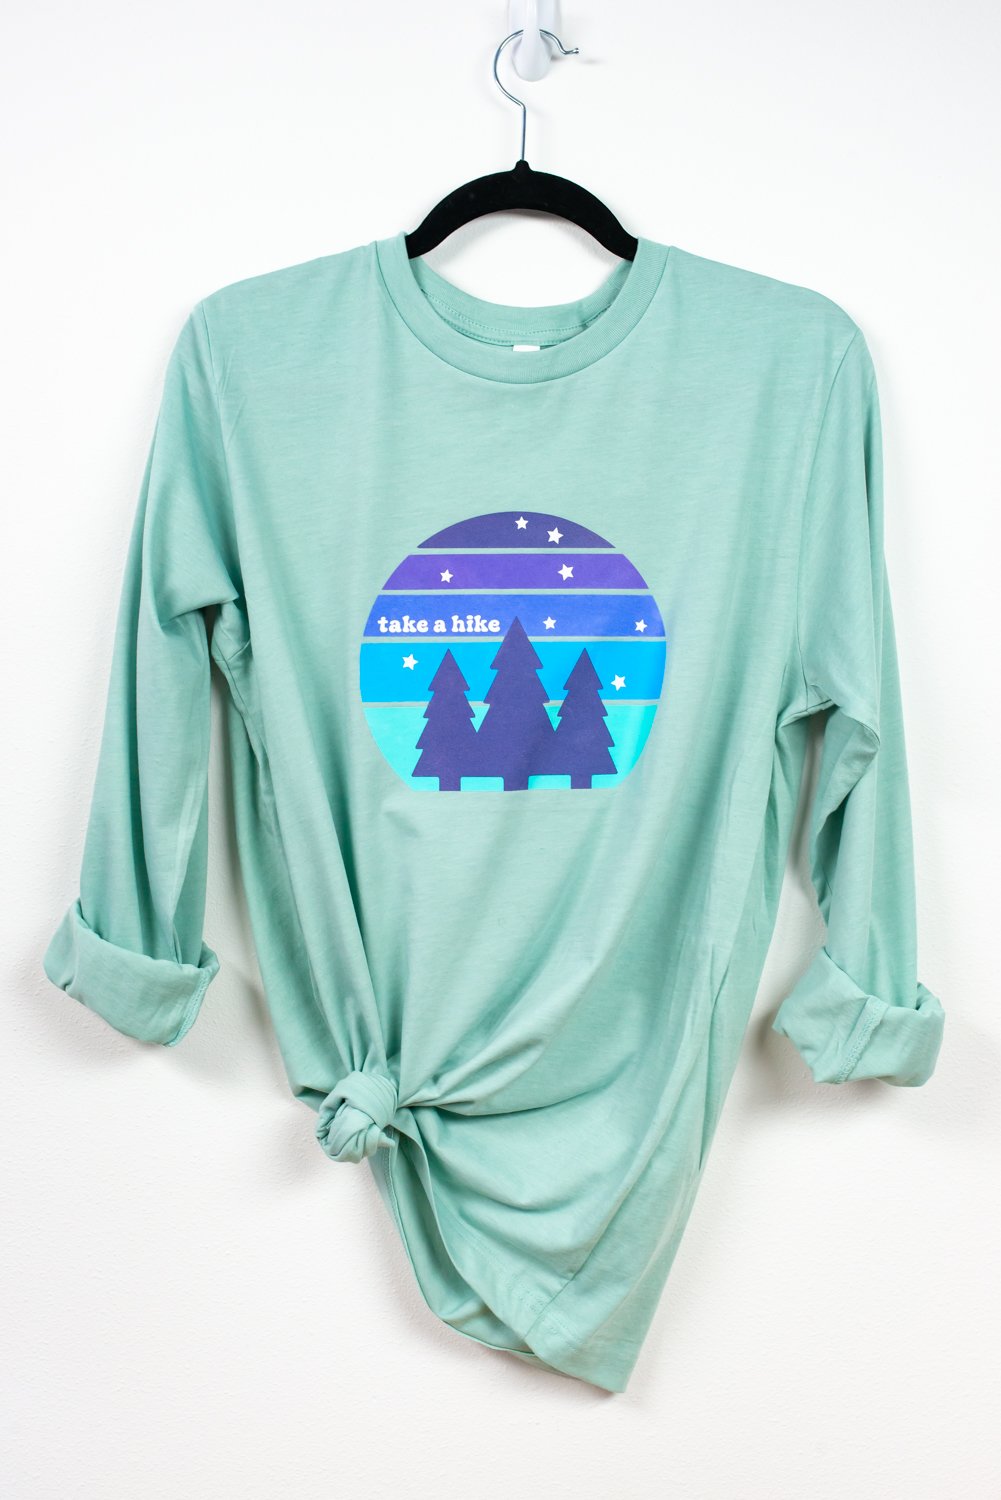 Mint-colored shirt with "take a hike" image hanging from hanger on white wall.